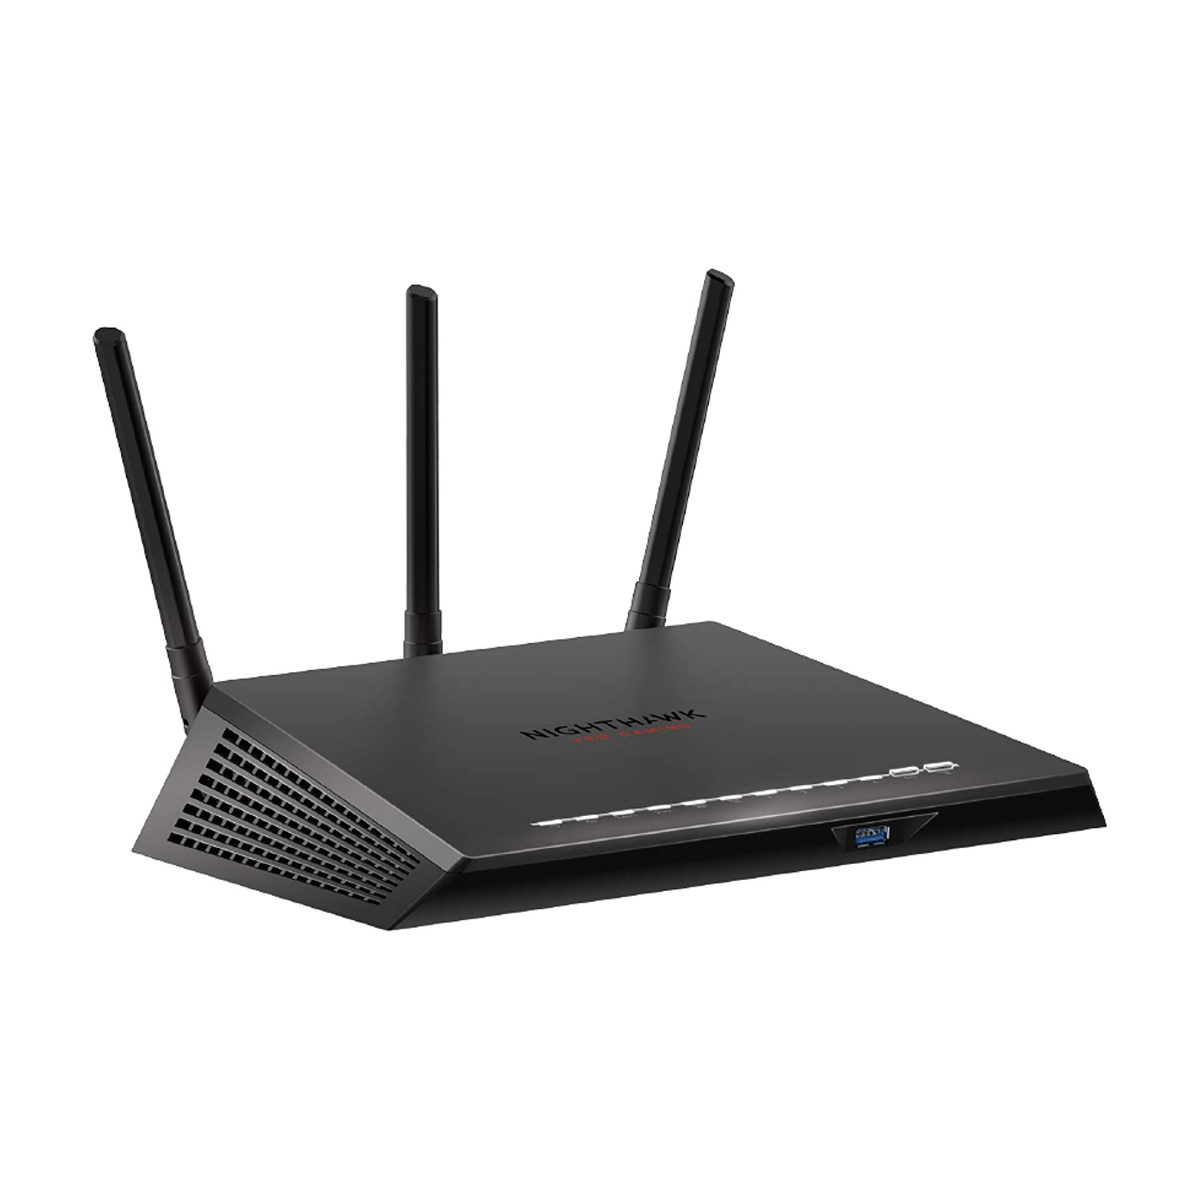 Netgear XR300 Nighthawk Pro Gaming WiFi Router with 4 Ethernet Ports and Wireless Speeds up to 1.75 Gbps, AC1750, (XR300), Black